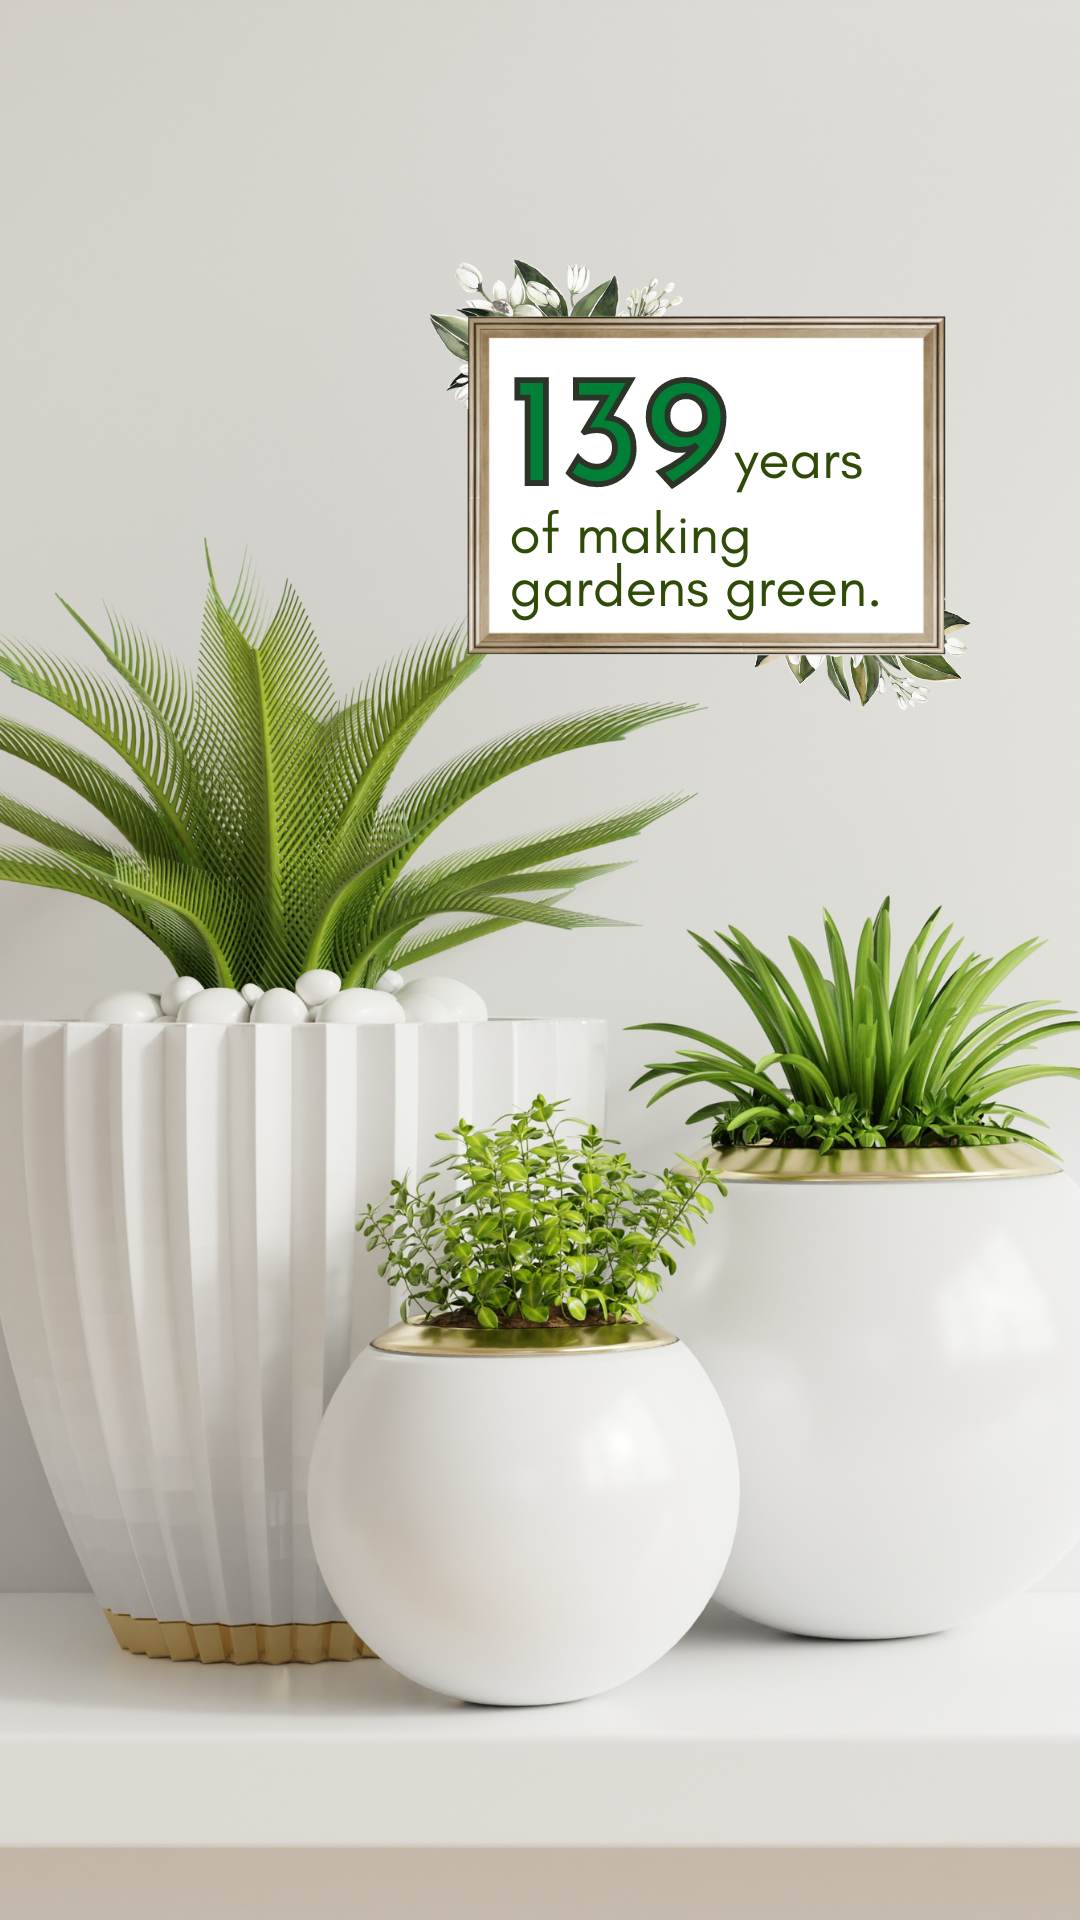 139 years of making gardens greens, Bombay Seeds